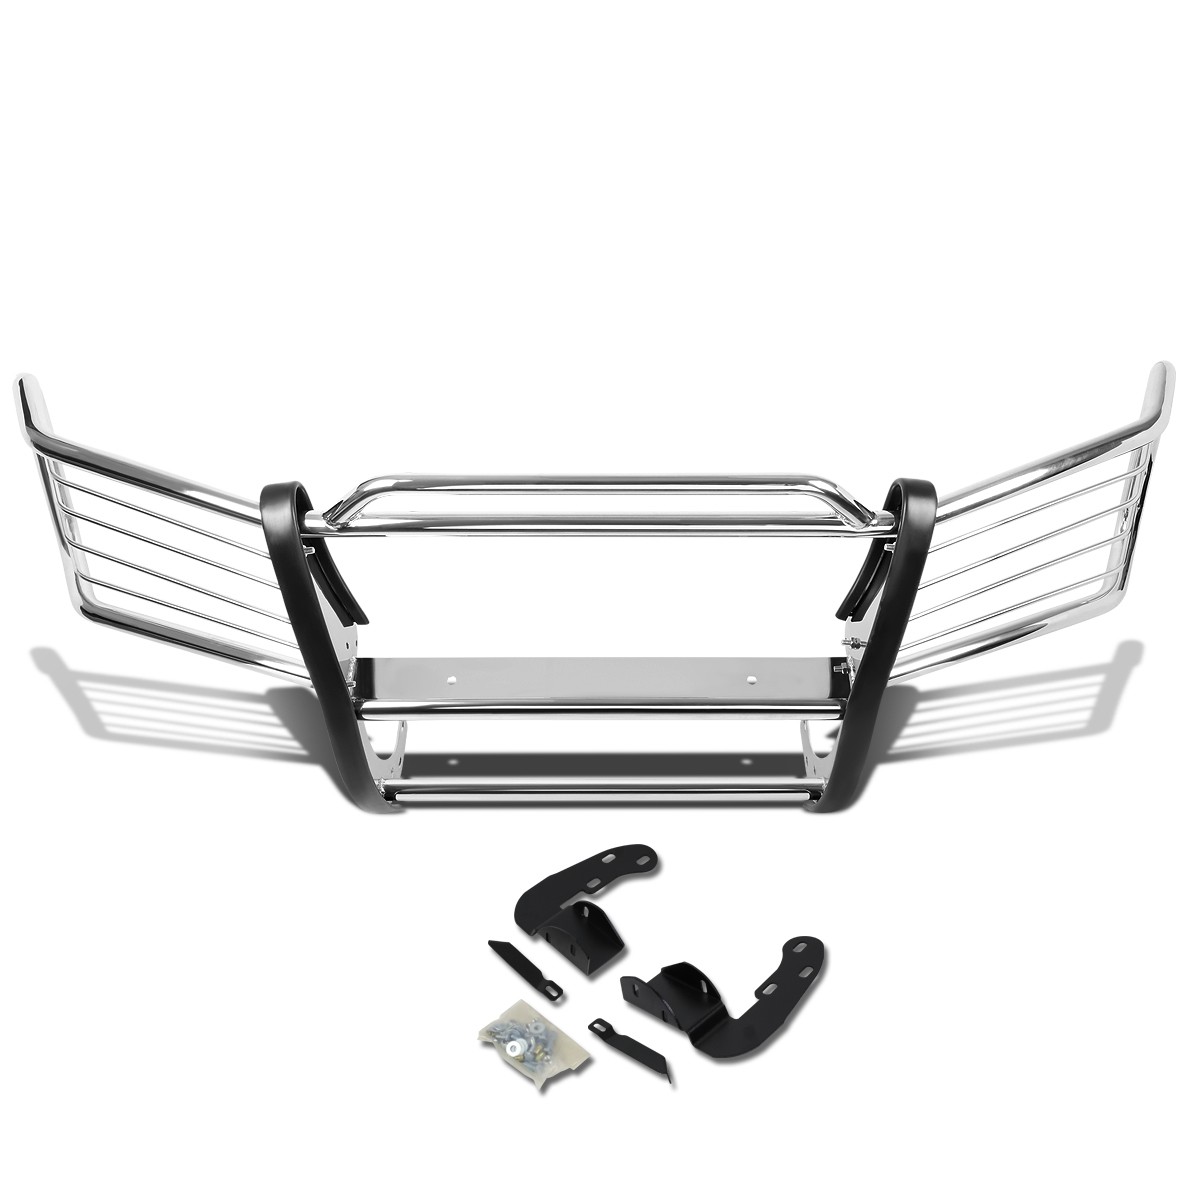 For 02 09 Chevy Trailblazer EXT Front Bumper Protector Brush Grille Guard Chrome